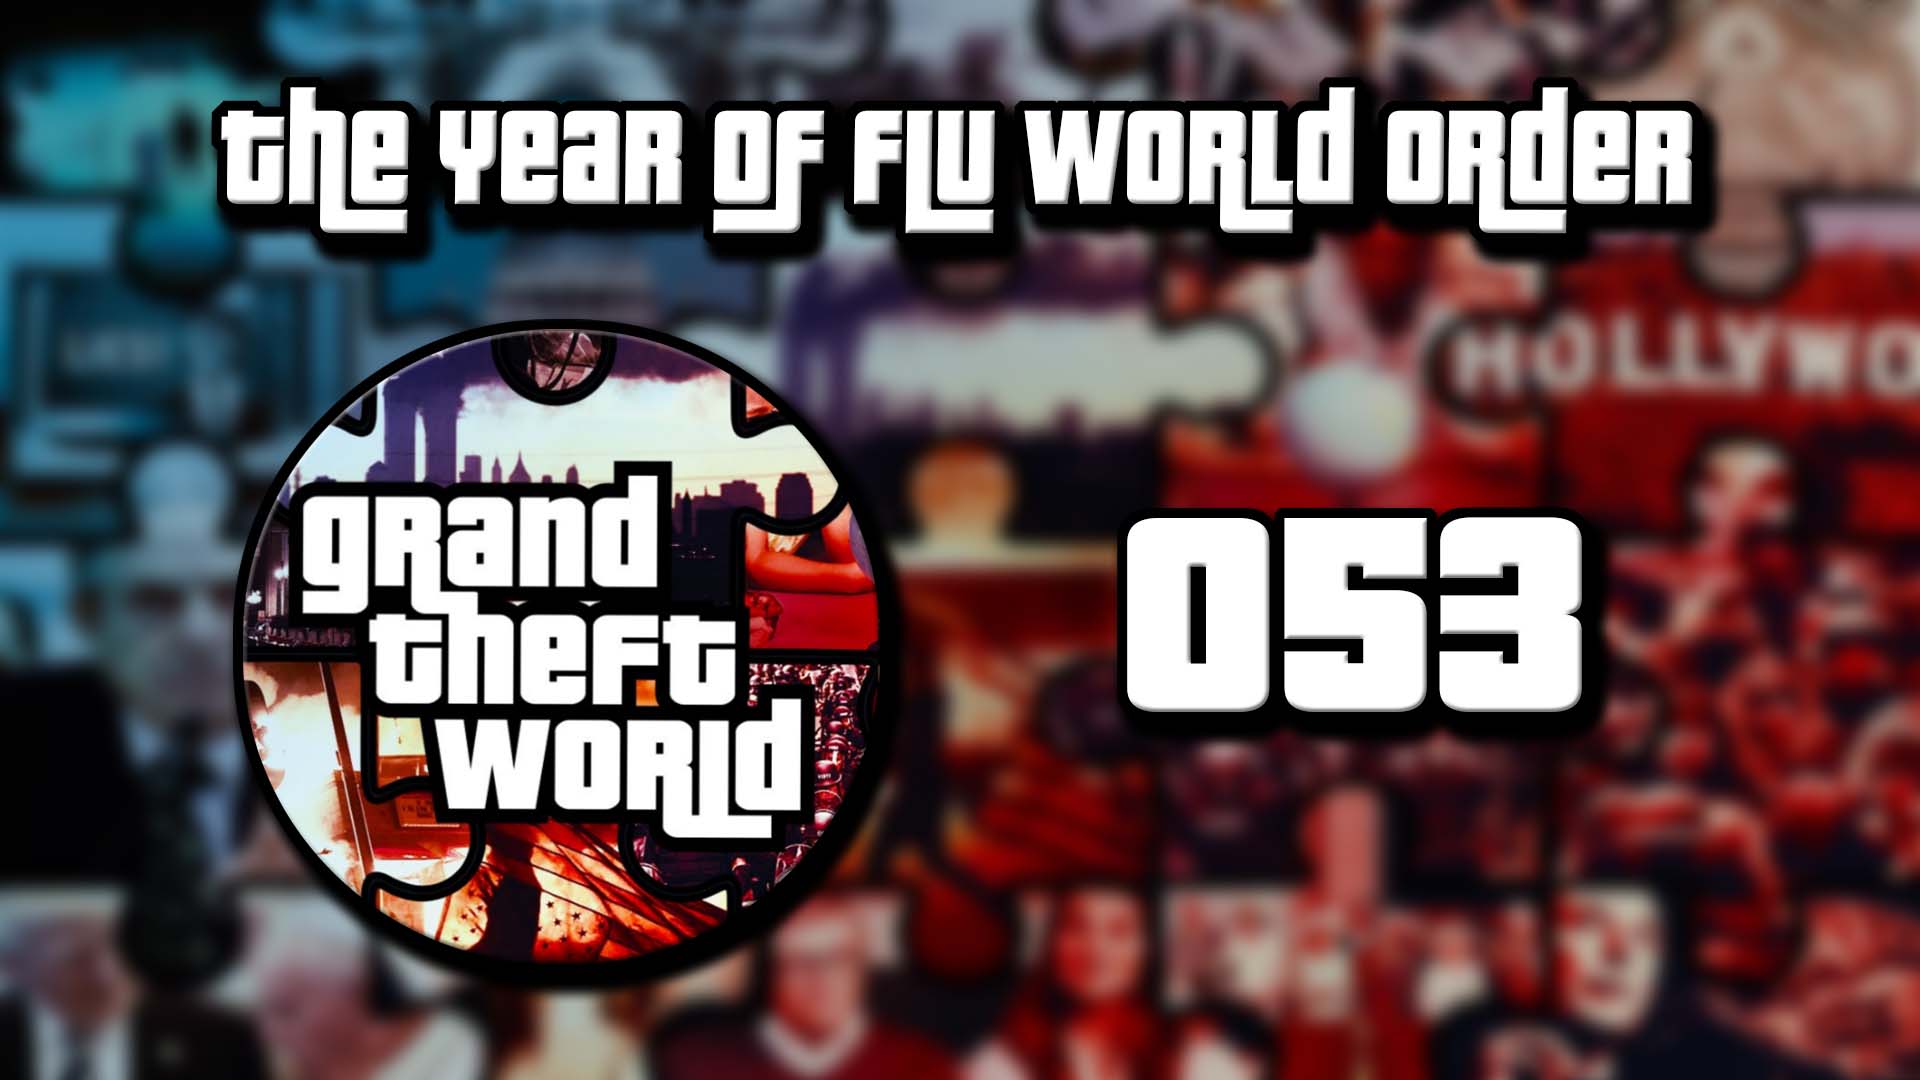 Grand Theft World Podcast 053 | The Year of Flu World Order